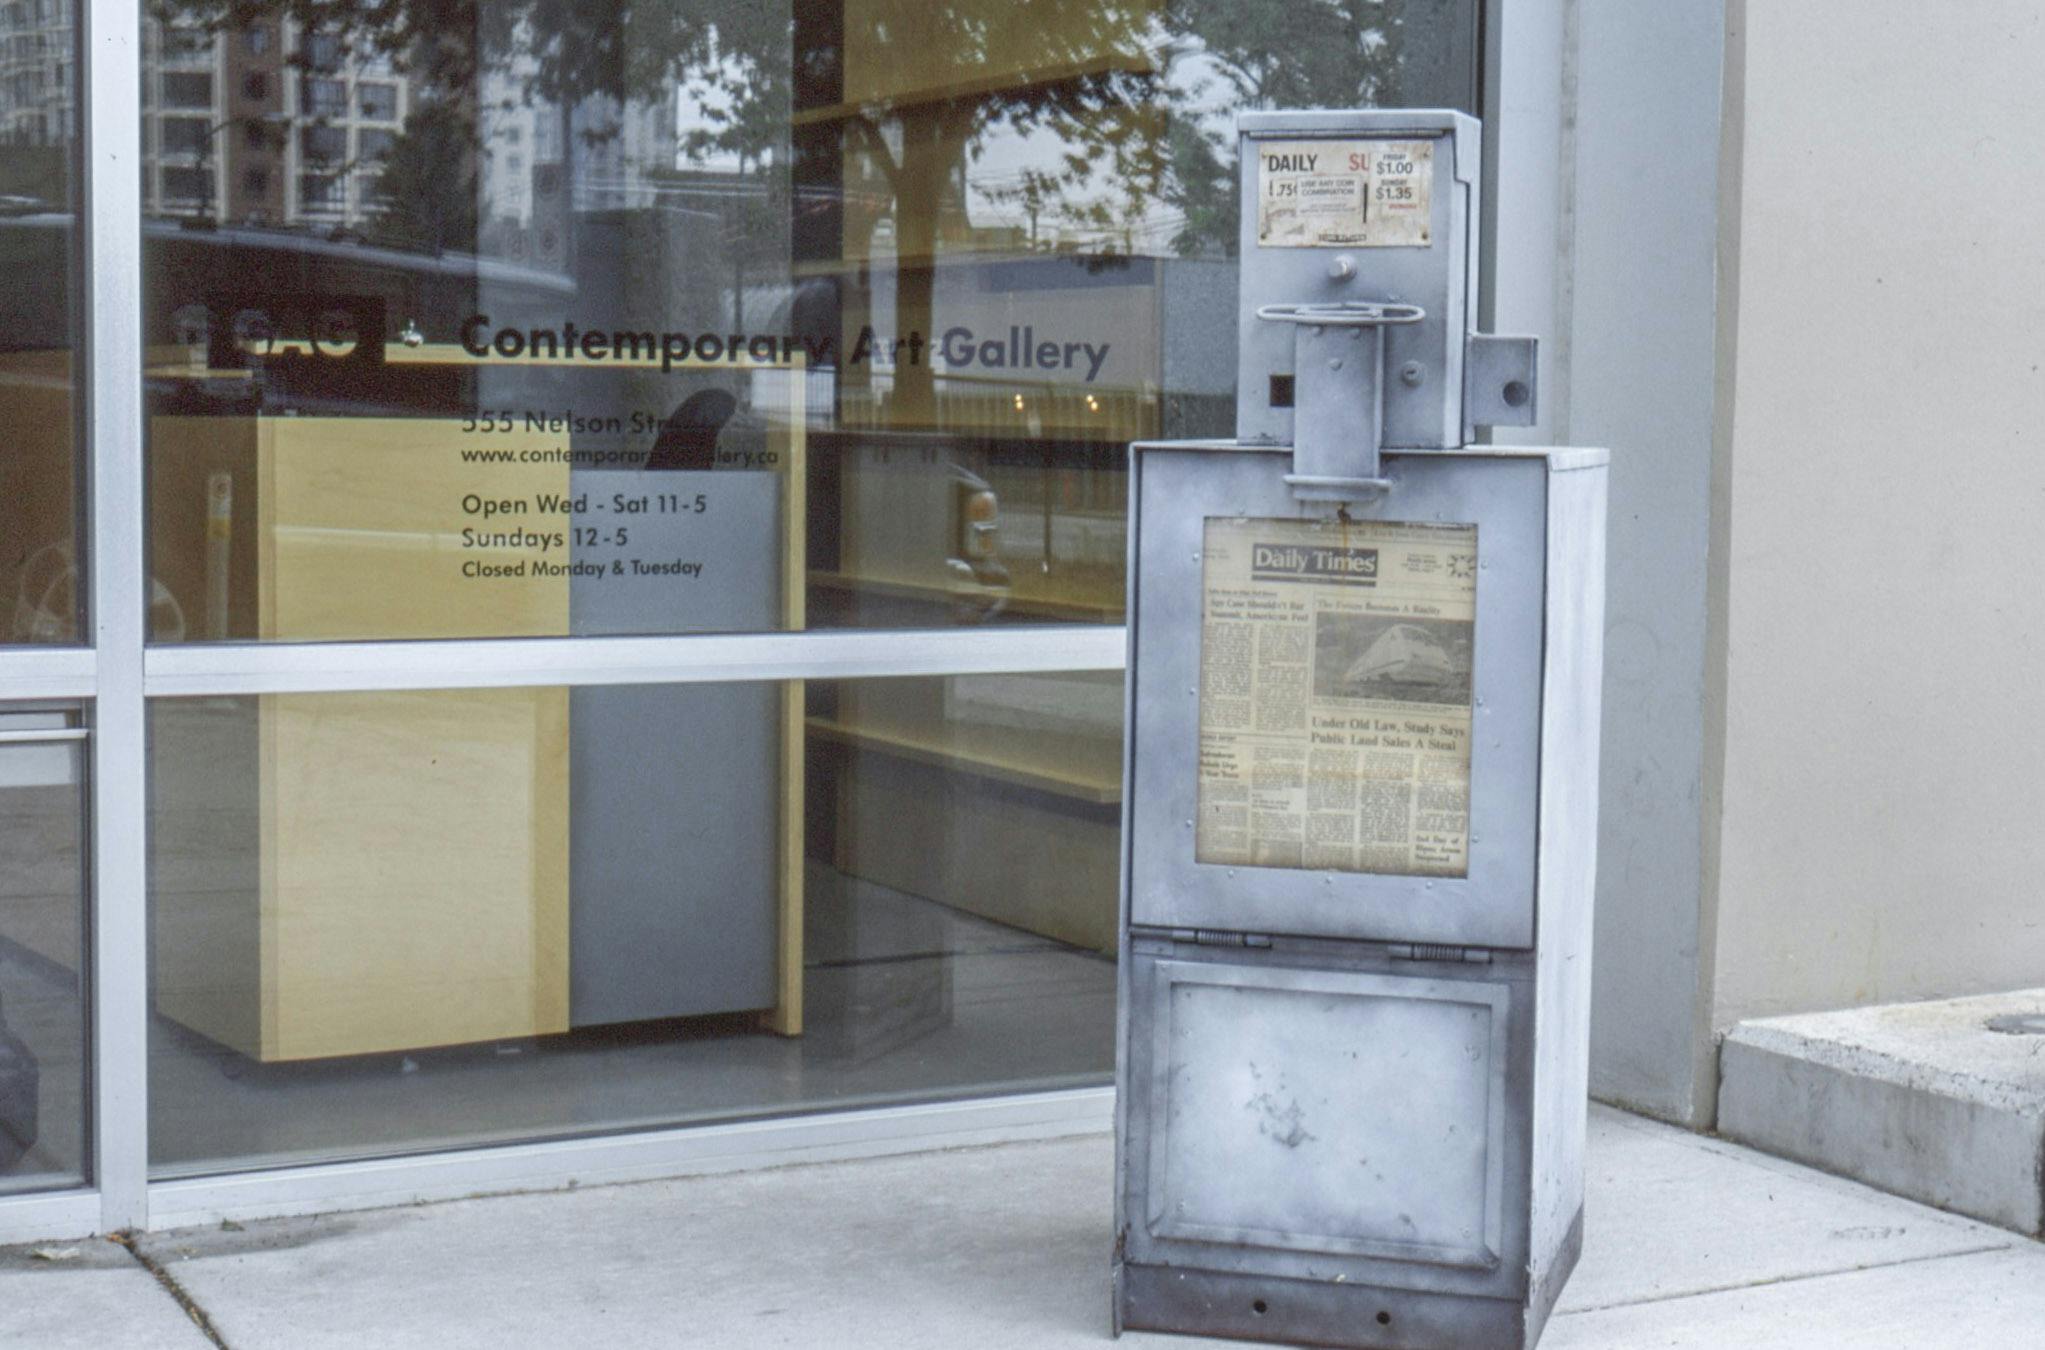 A metal made newspaper vending machine sits outside of the CAG’s glass entrance. This silver coloured machine looks old. It sells Daily Times.